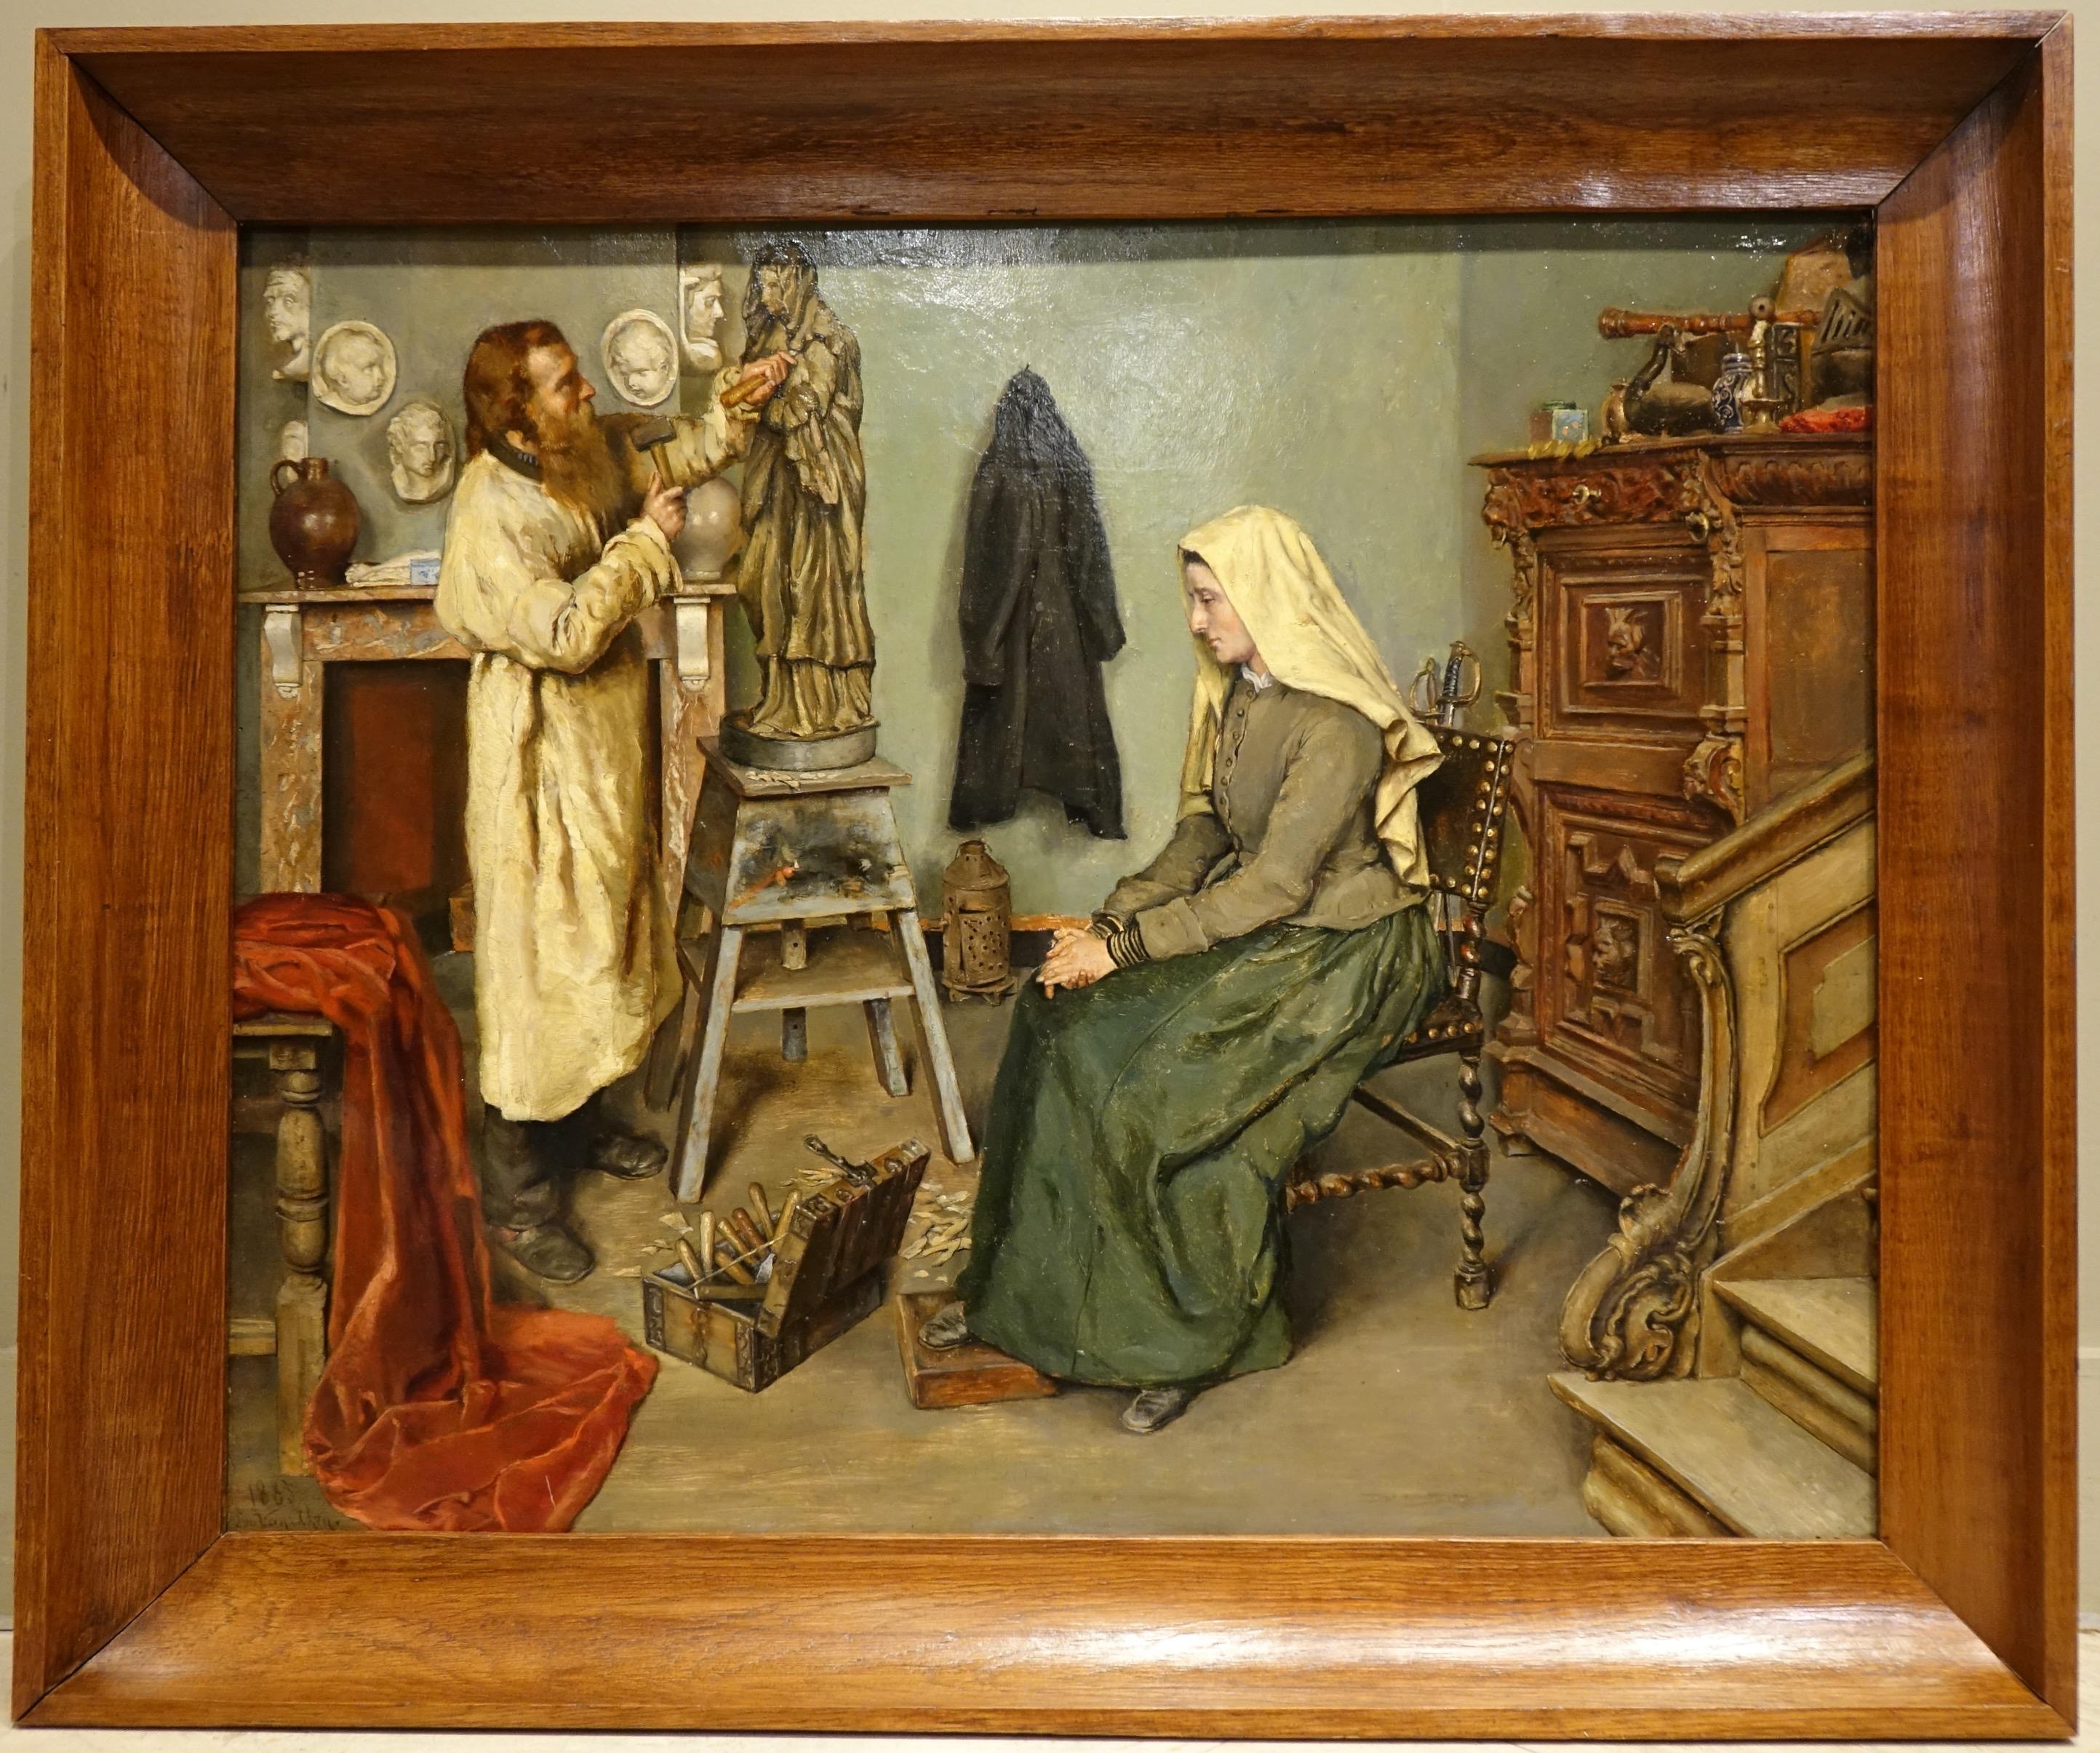 Oil on oak panel representing a seated model, posing for a sculptor making a statue of the Virgin, in the style of the late 15th century.
Around them a heterogeneous set of accessories, and a chest filled with tools.
Signed lower left Leo van AKEN,